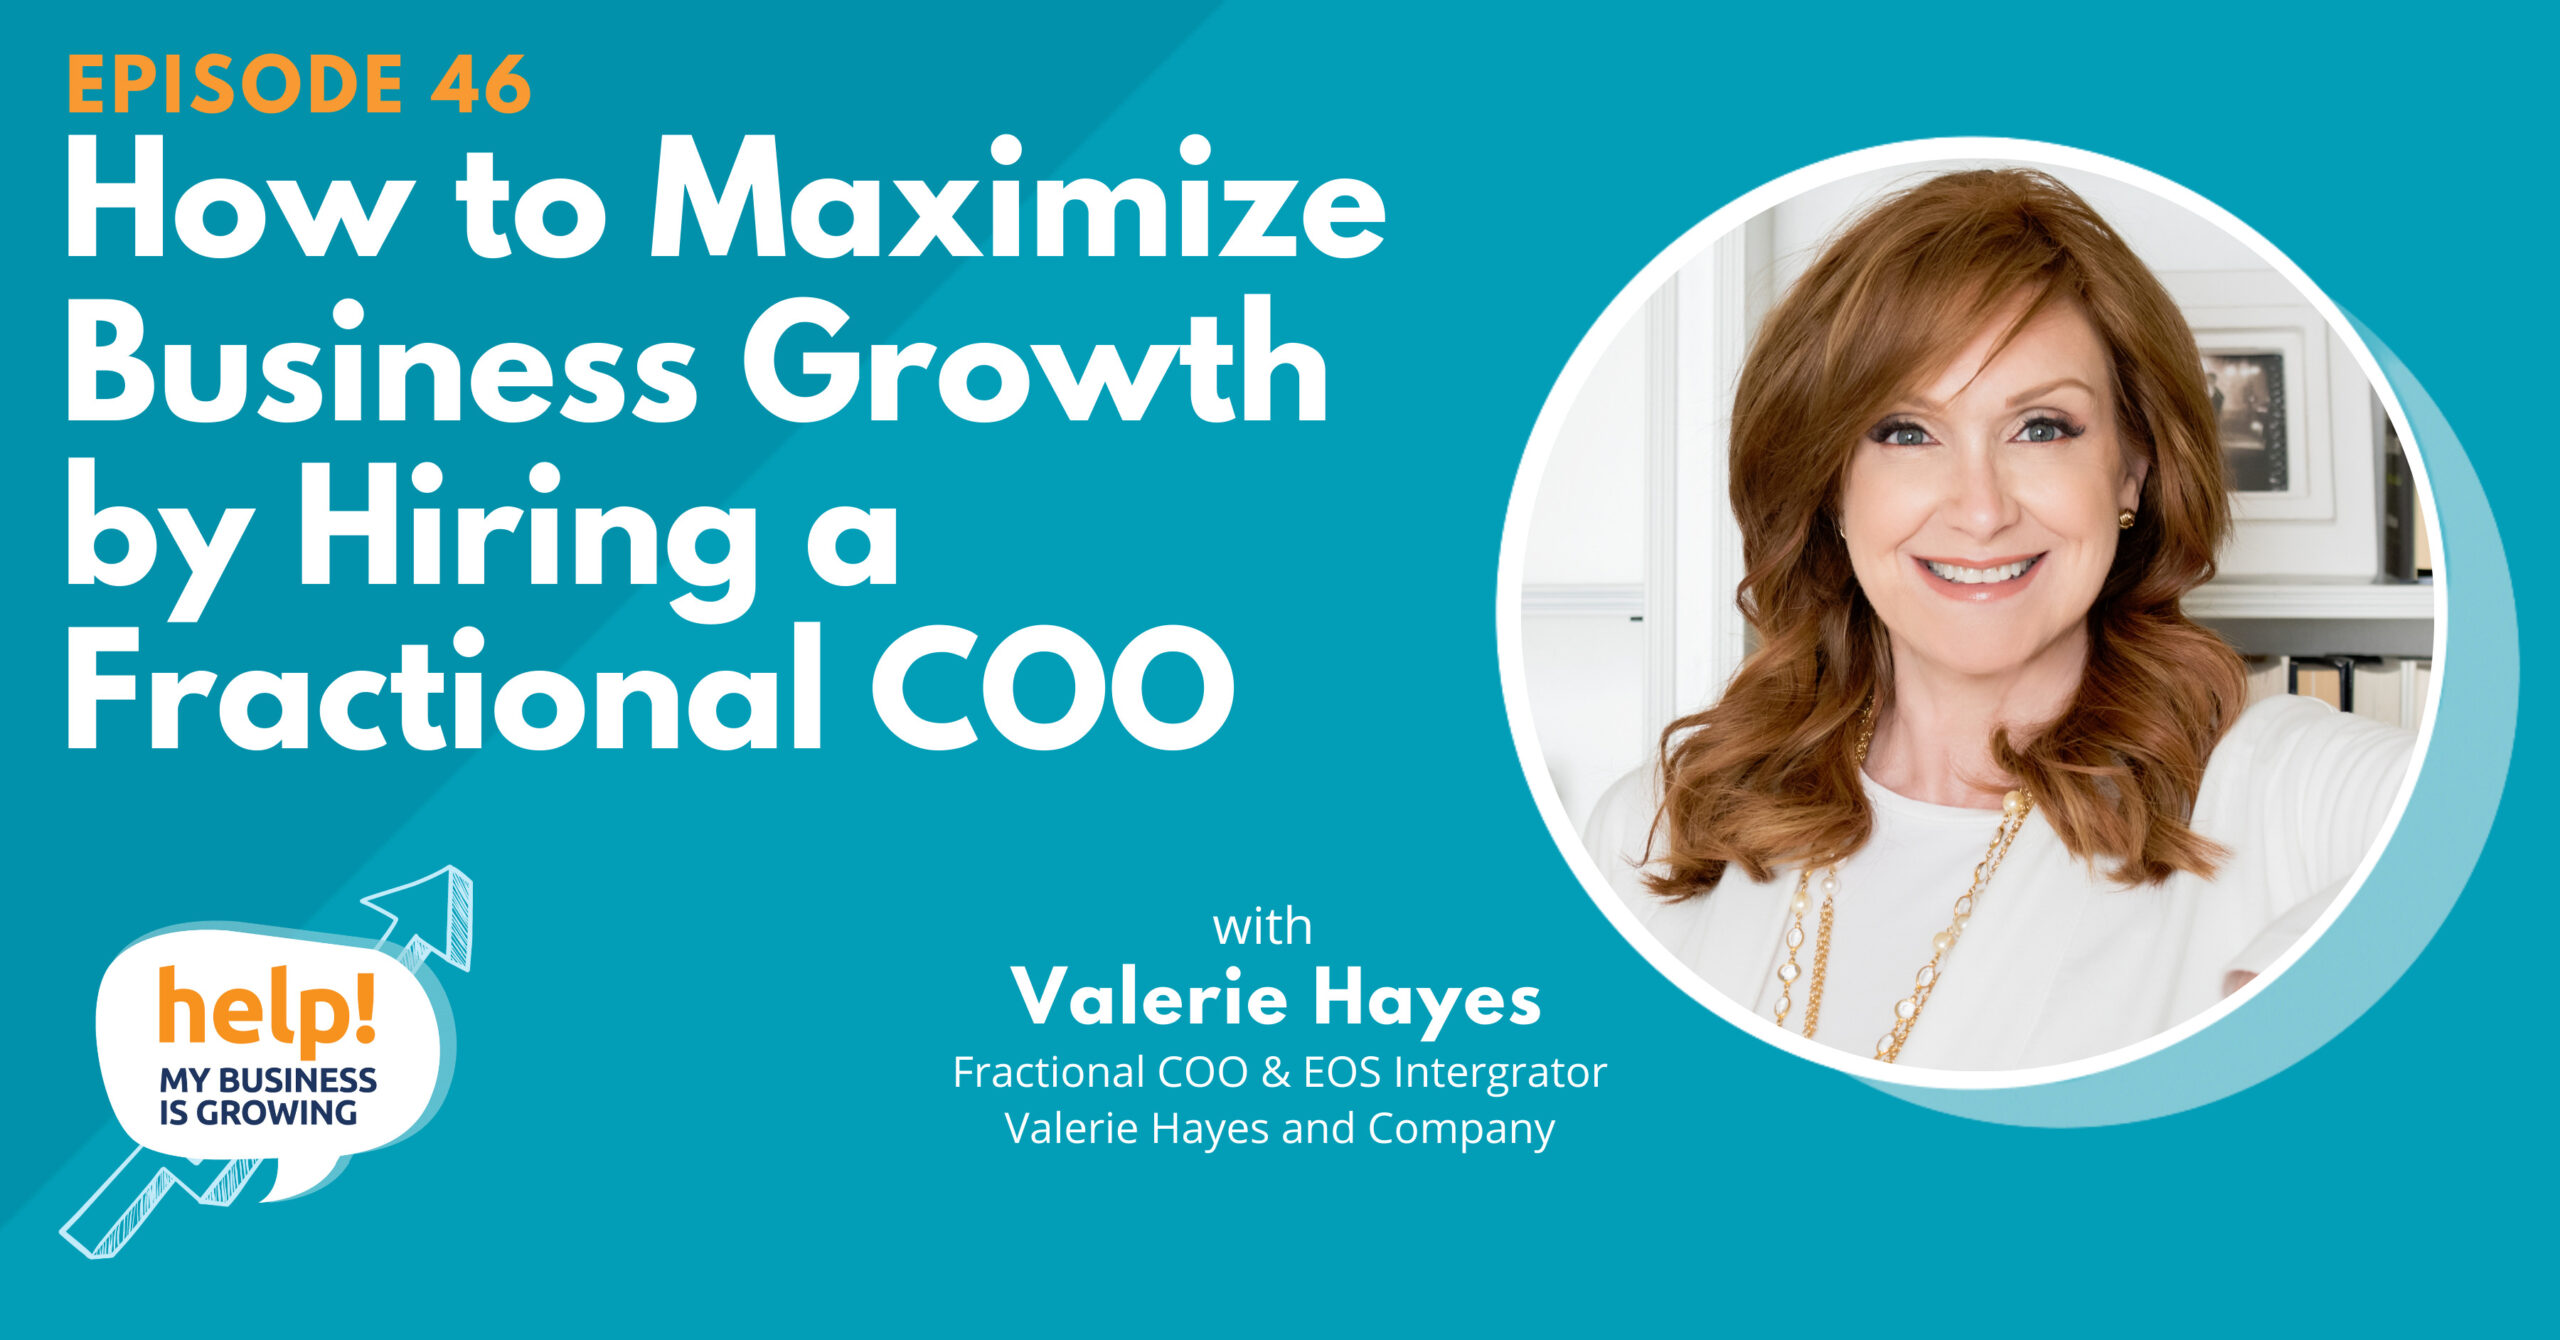 How to Maximize Business Growth by Hiring a Fractional COO